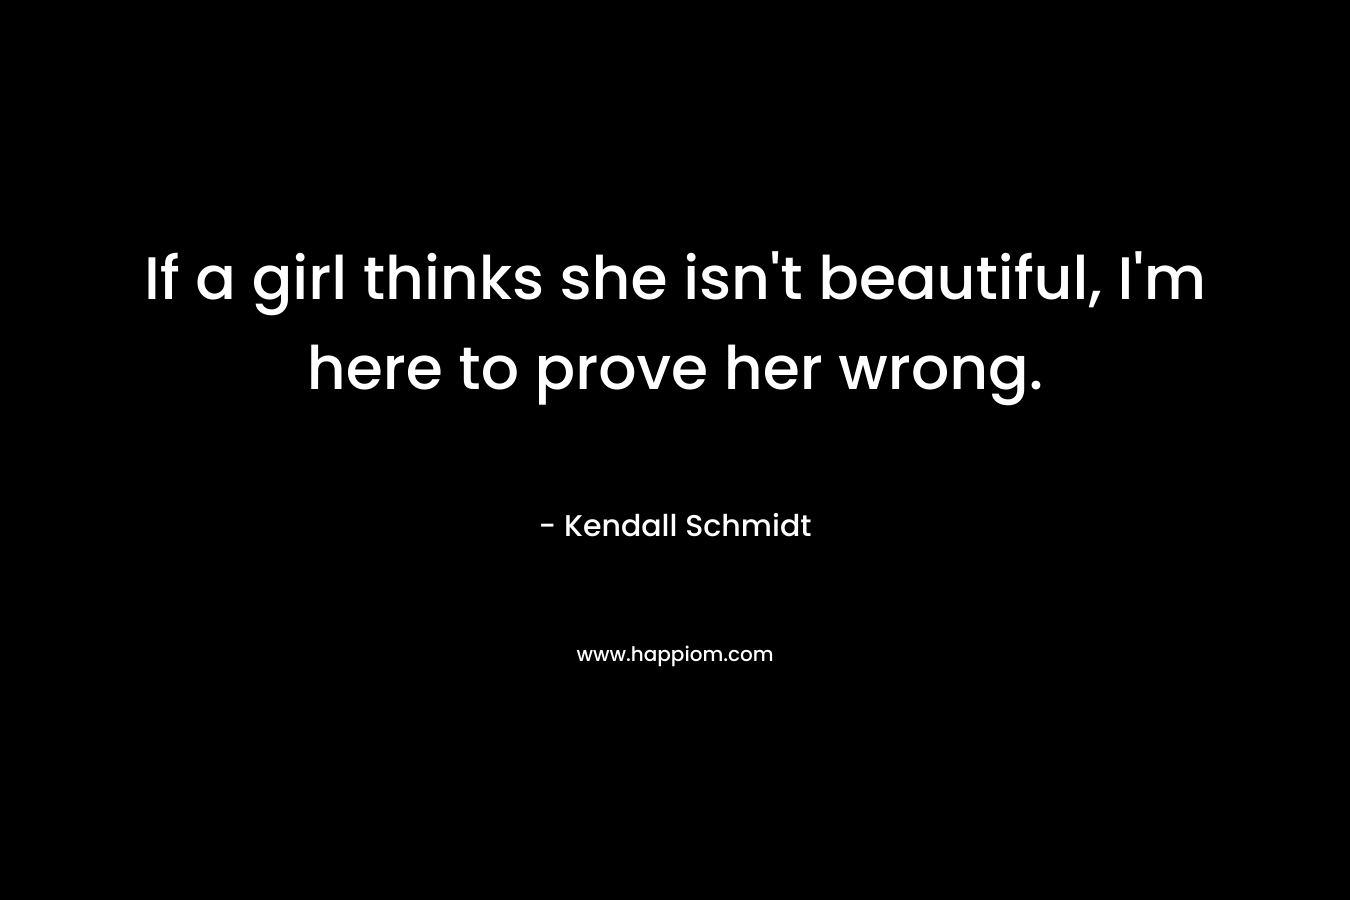 If a girl thinks she isn’t beautiful, I’m here to prove her wrong. – Kendall Schmidt